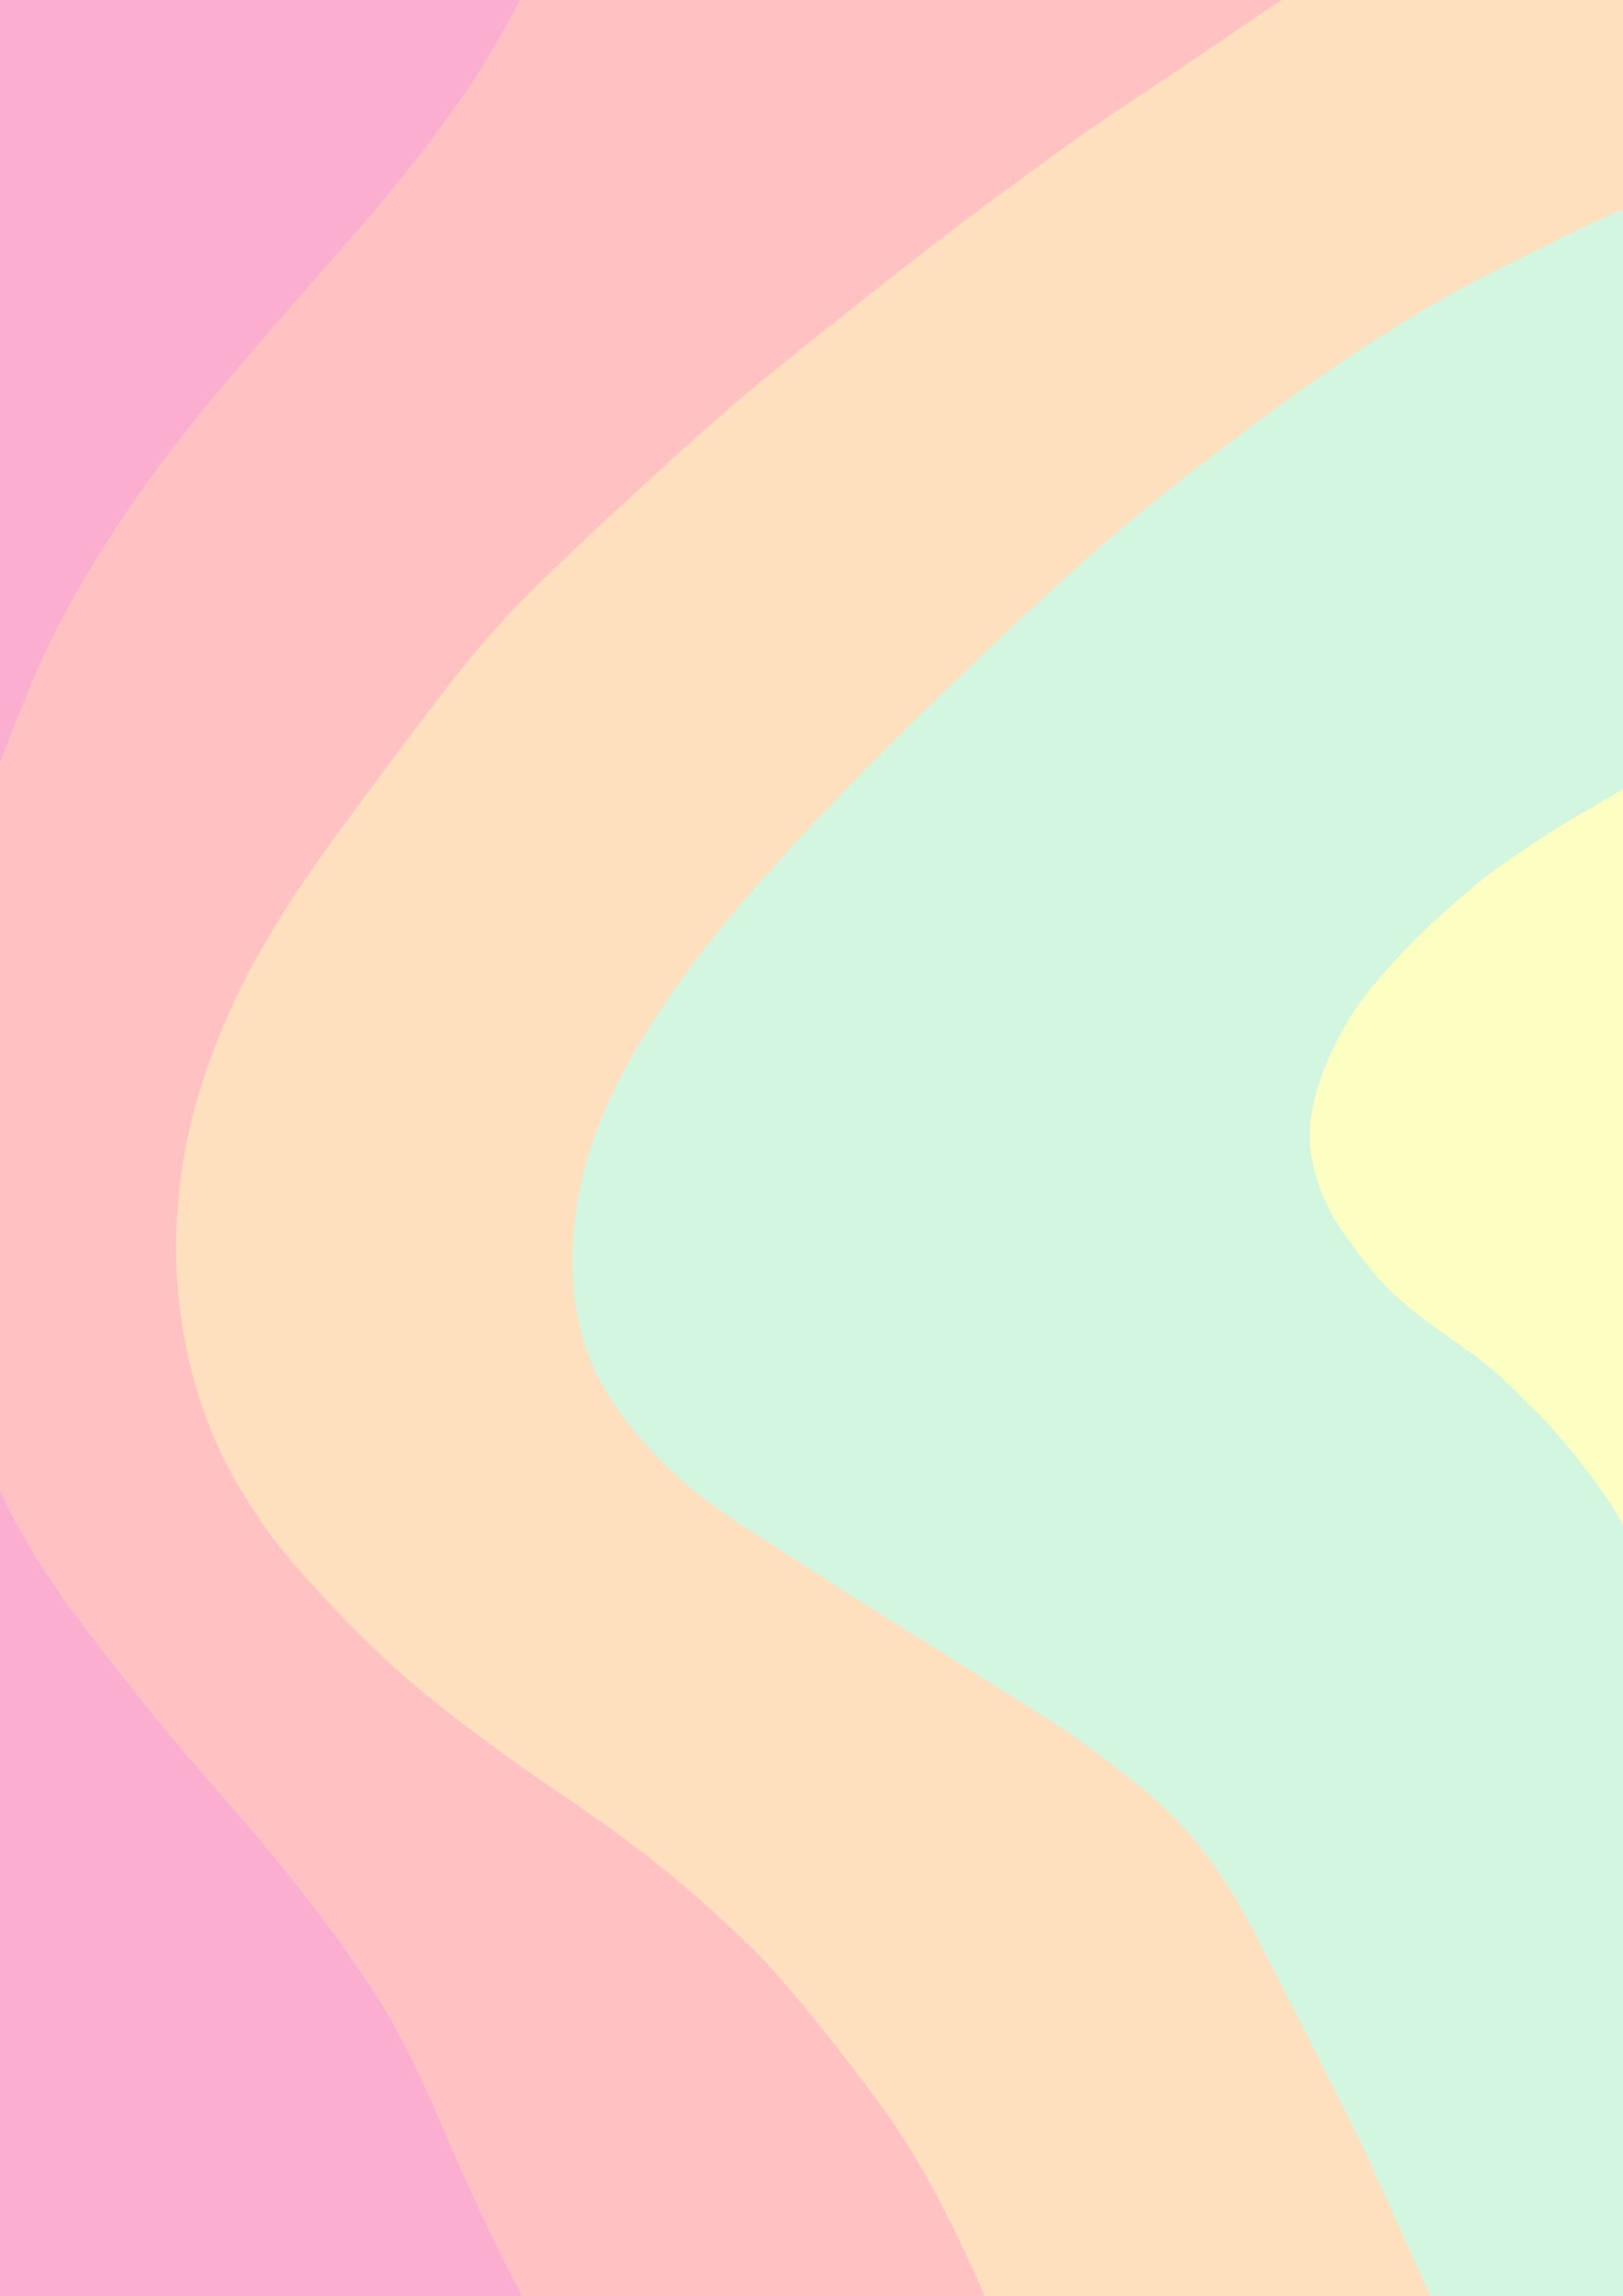 A pink and yellow striped background - Colorful